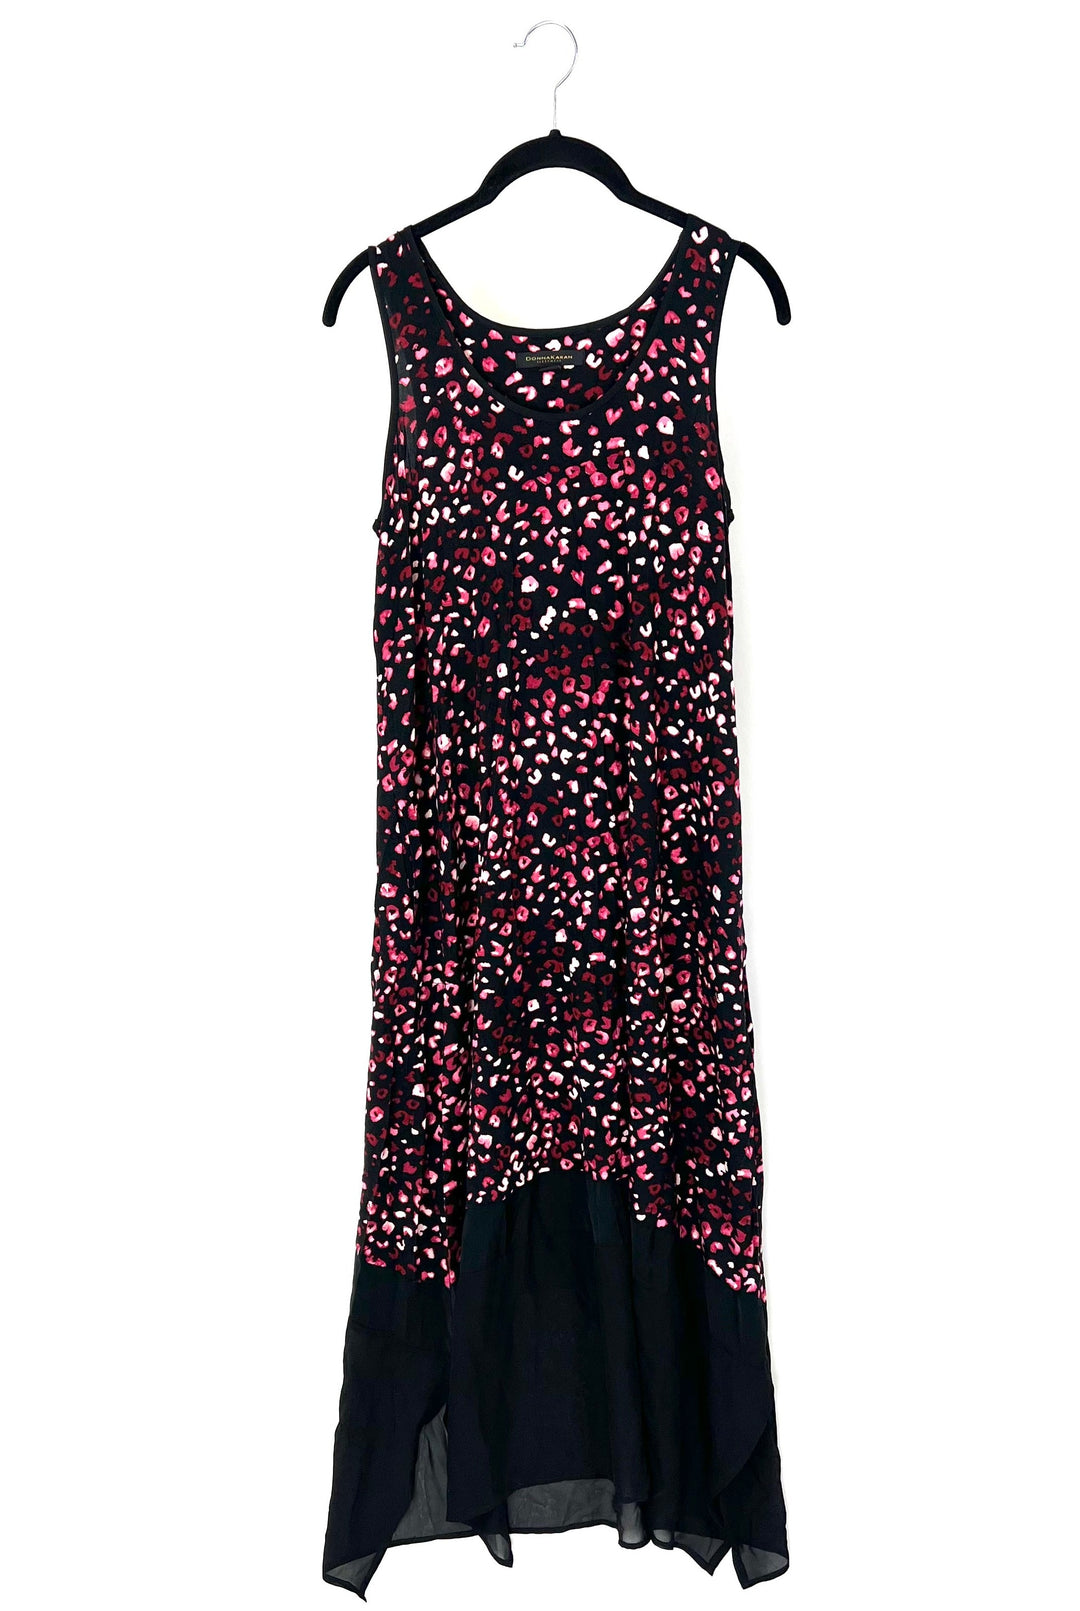 Sleeveless Pink, Red, and Black Nightgown - Size 4/6